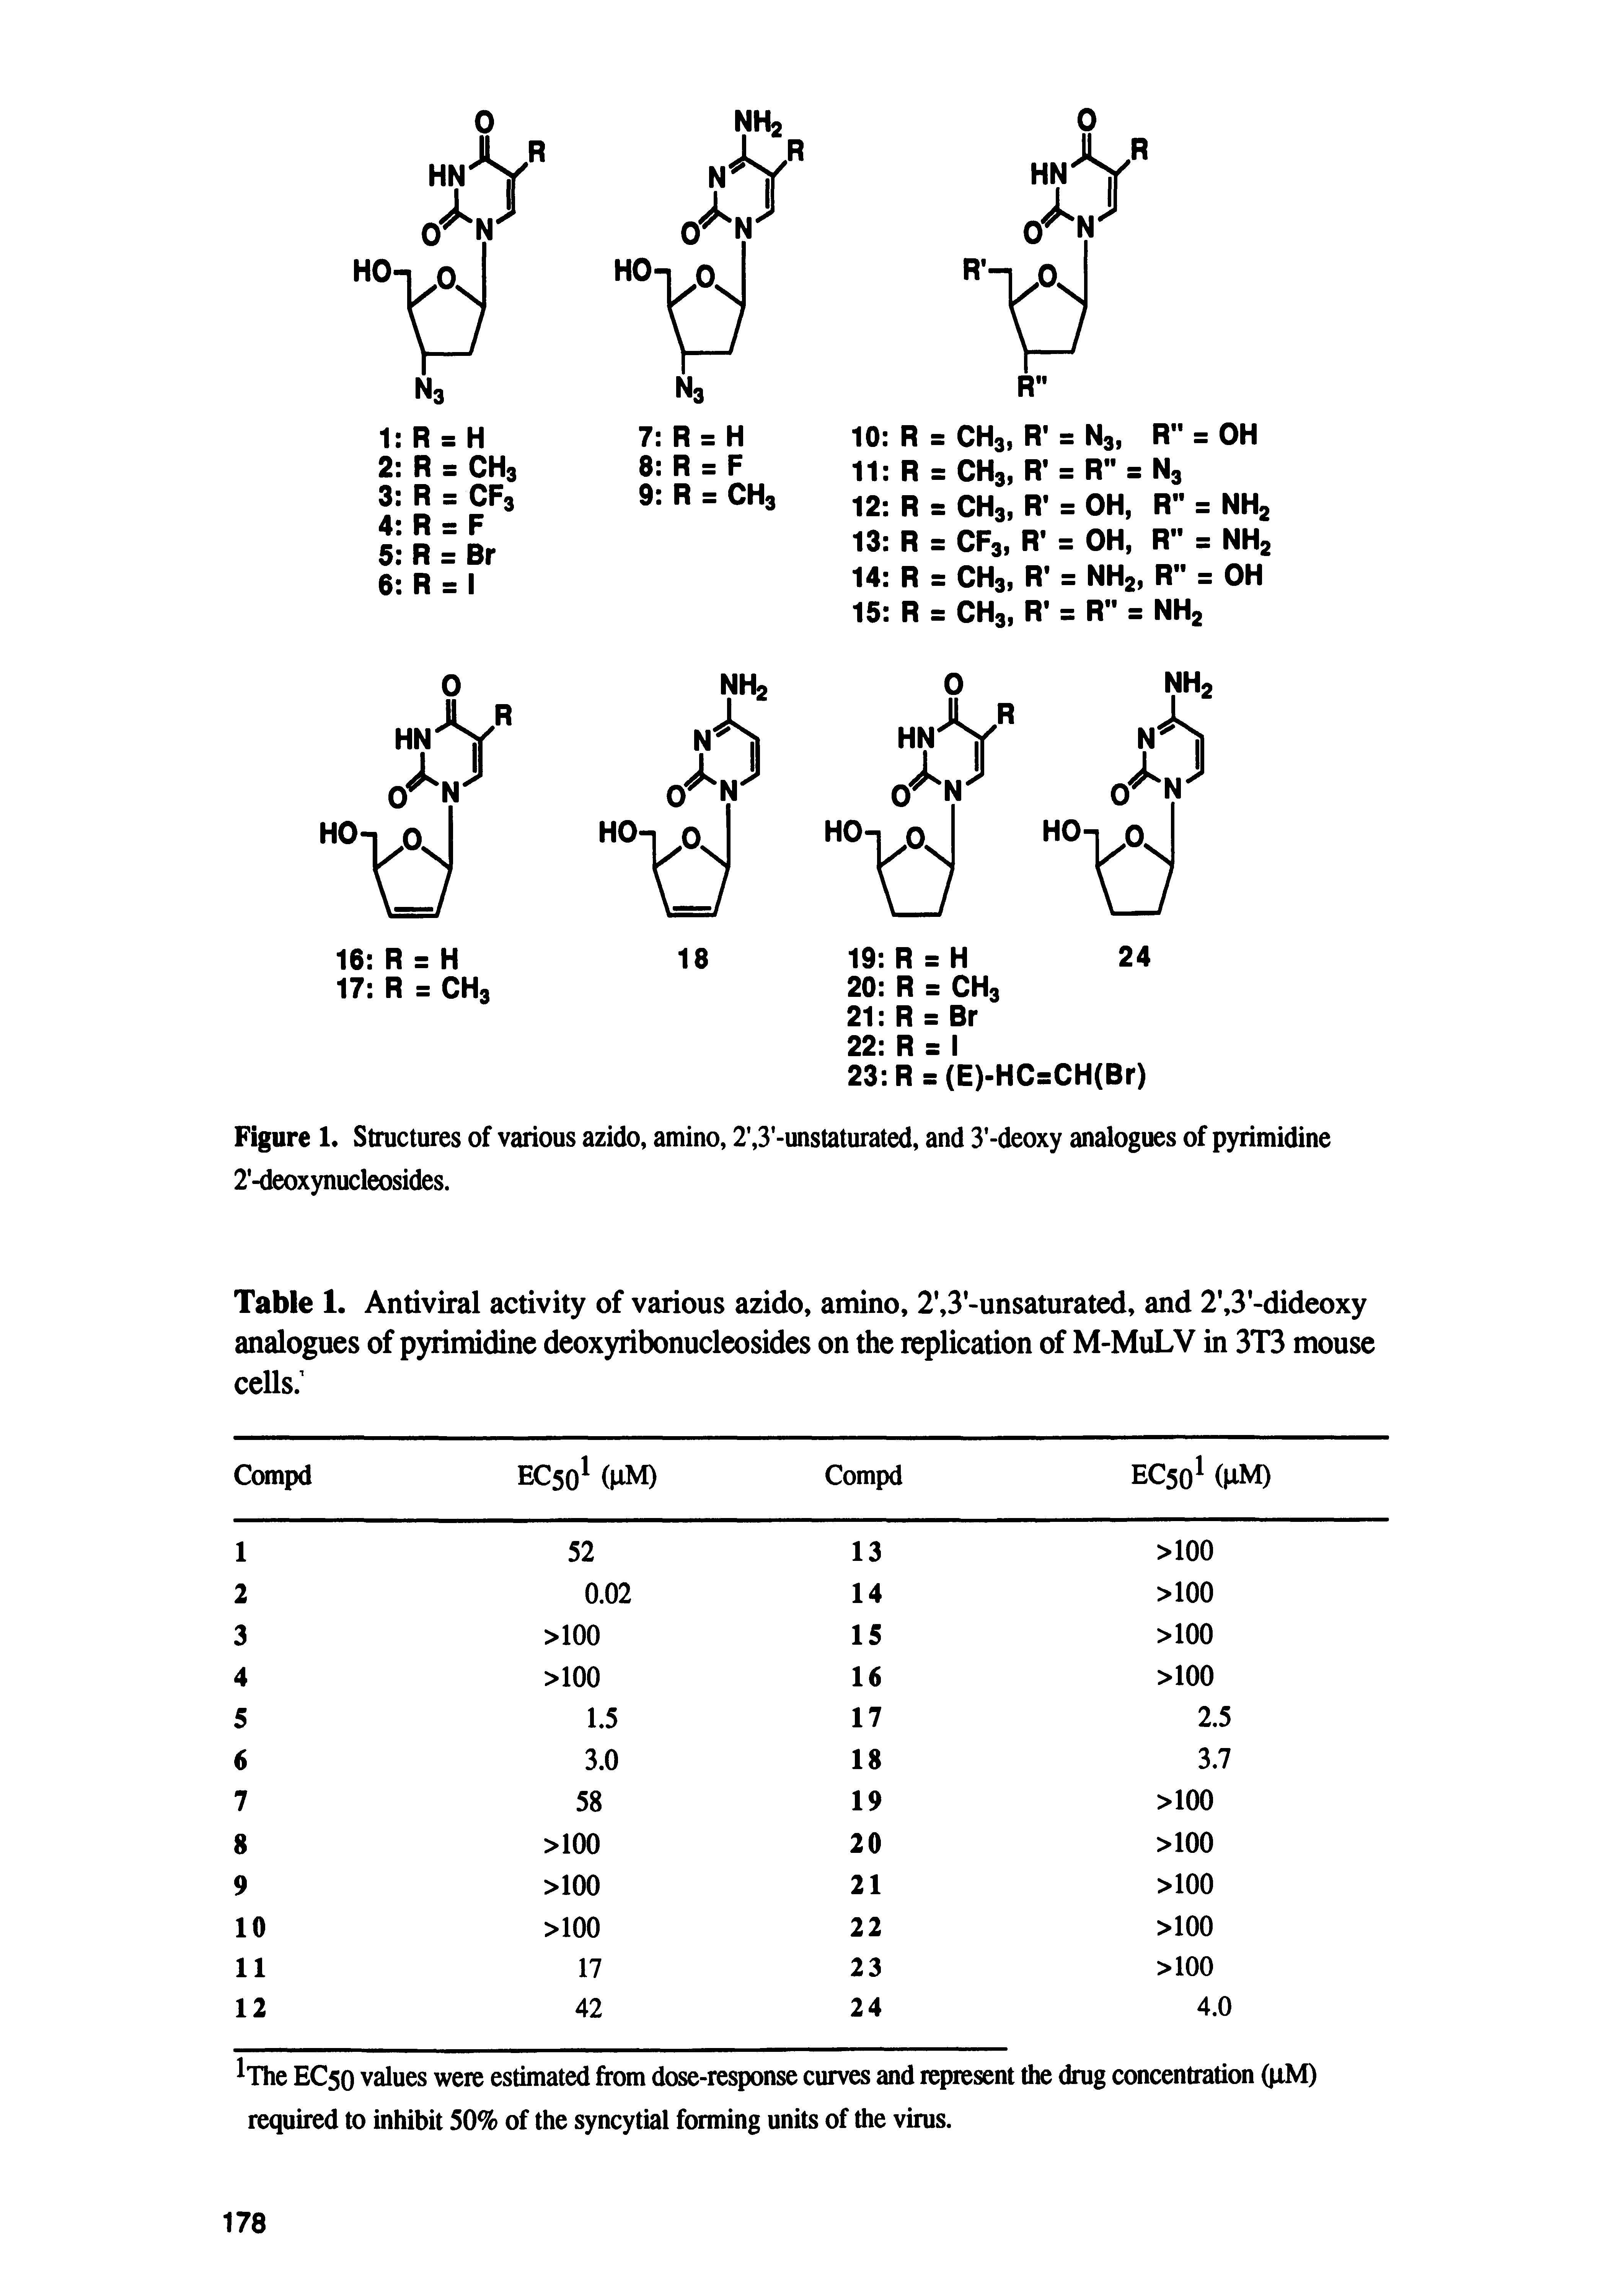 Table 1. Antiviral activity of various azido, amino, 2 ,3 -unsaturated, and 2, 3 -dideoxy analogues of pyrimidine deoxyribonucleosides on the replication of M-MuLV in 3T3 mouse cells. ...